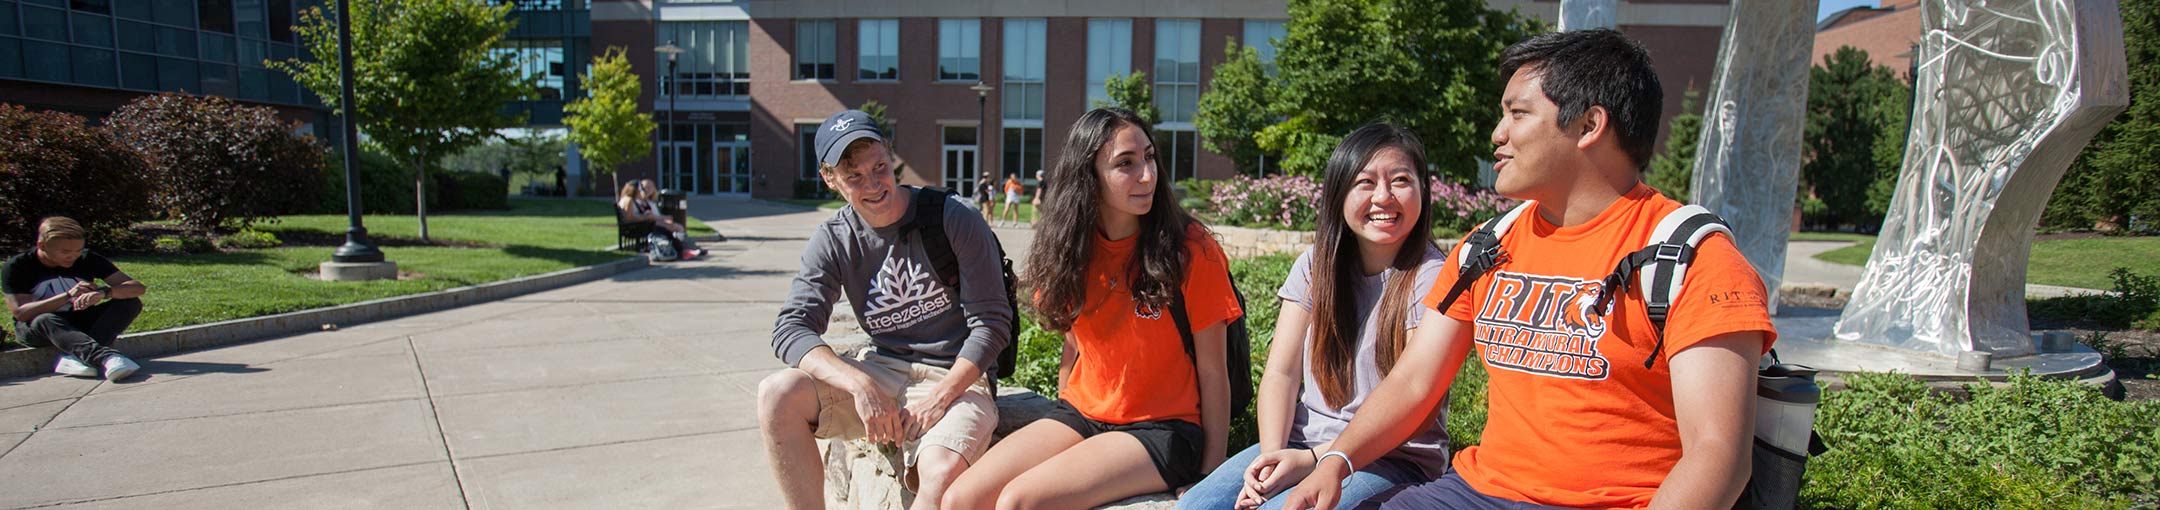 Students sitting on a brick wall in a courtyard on a sunny day wearing orange RIT shirts